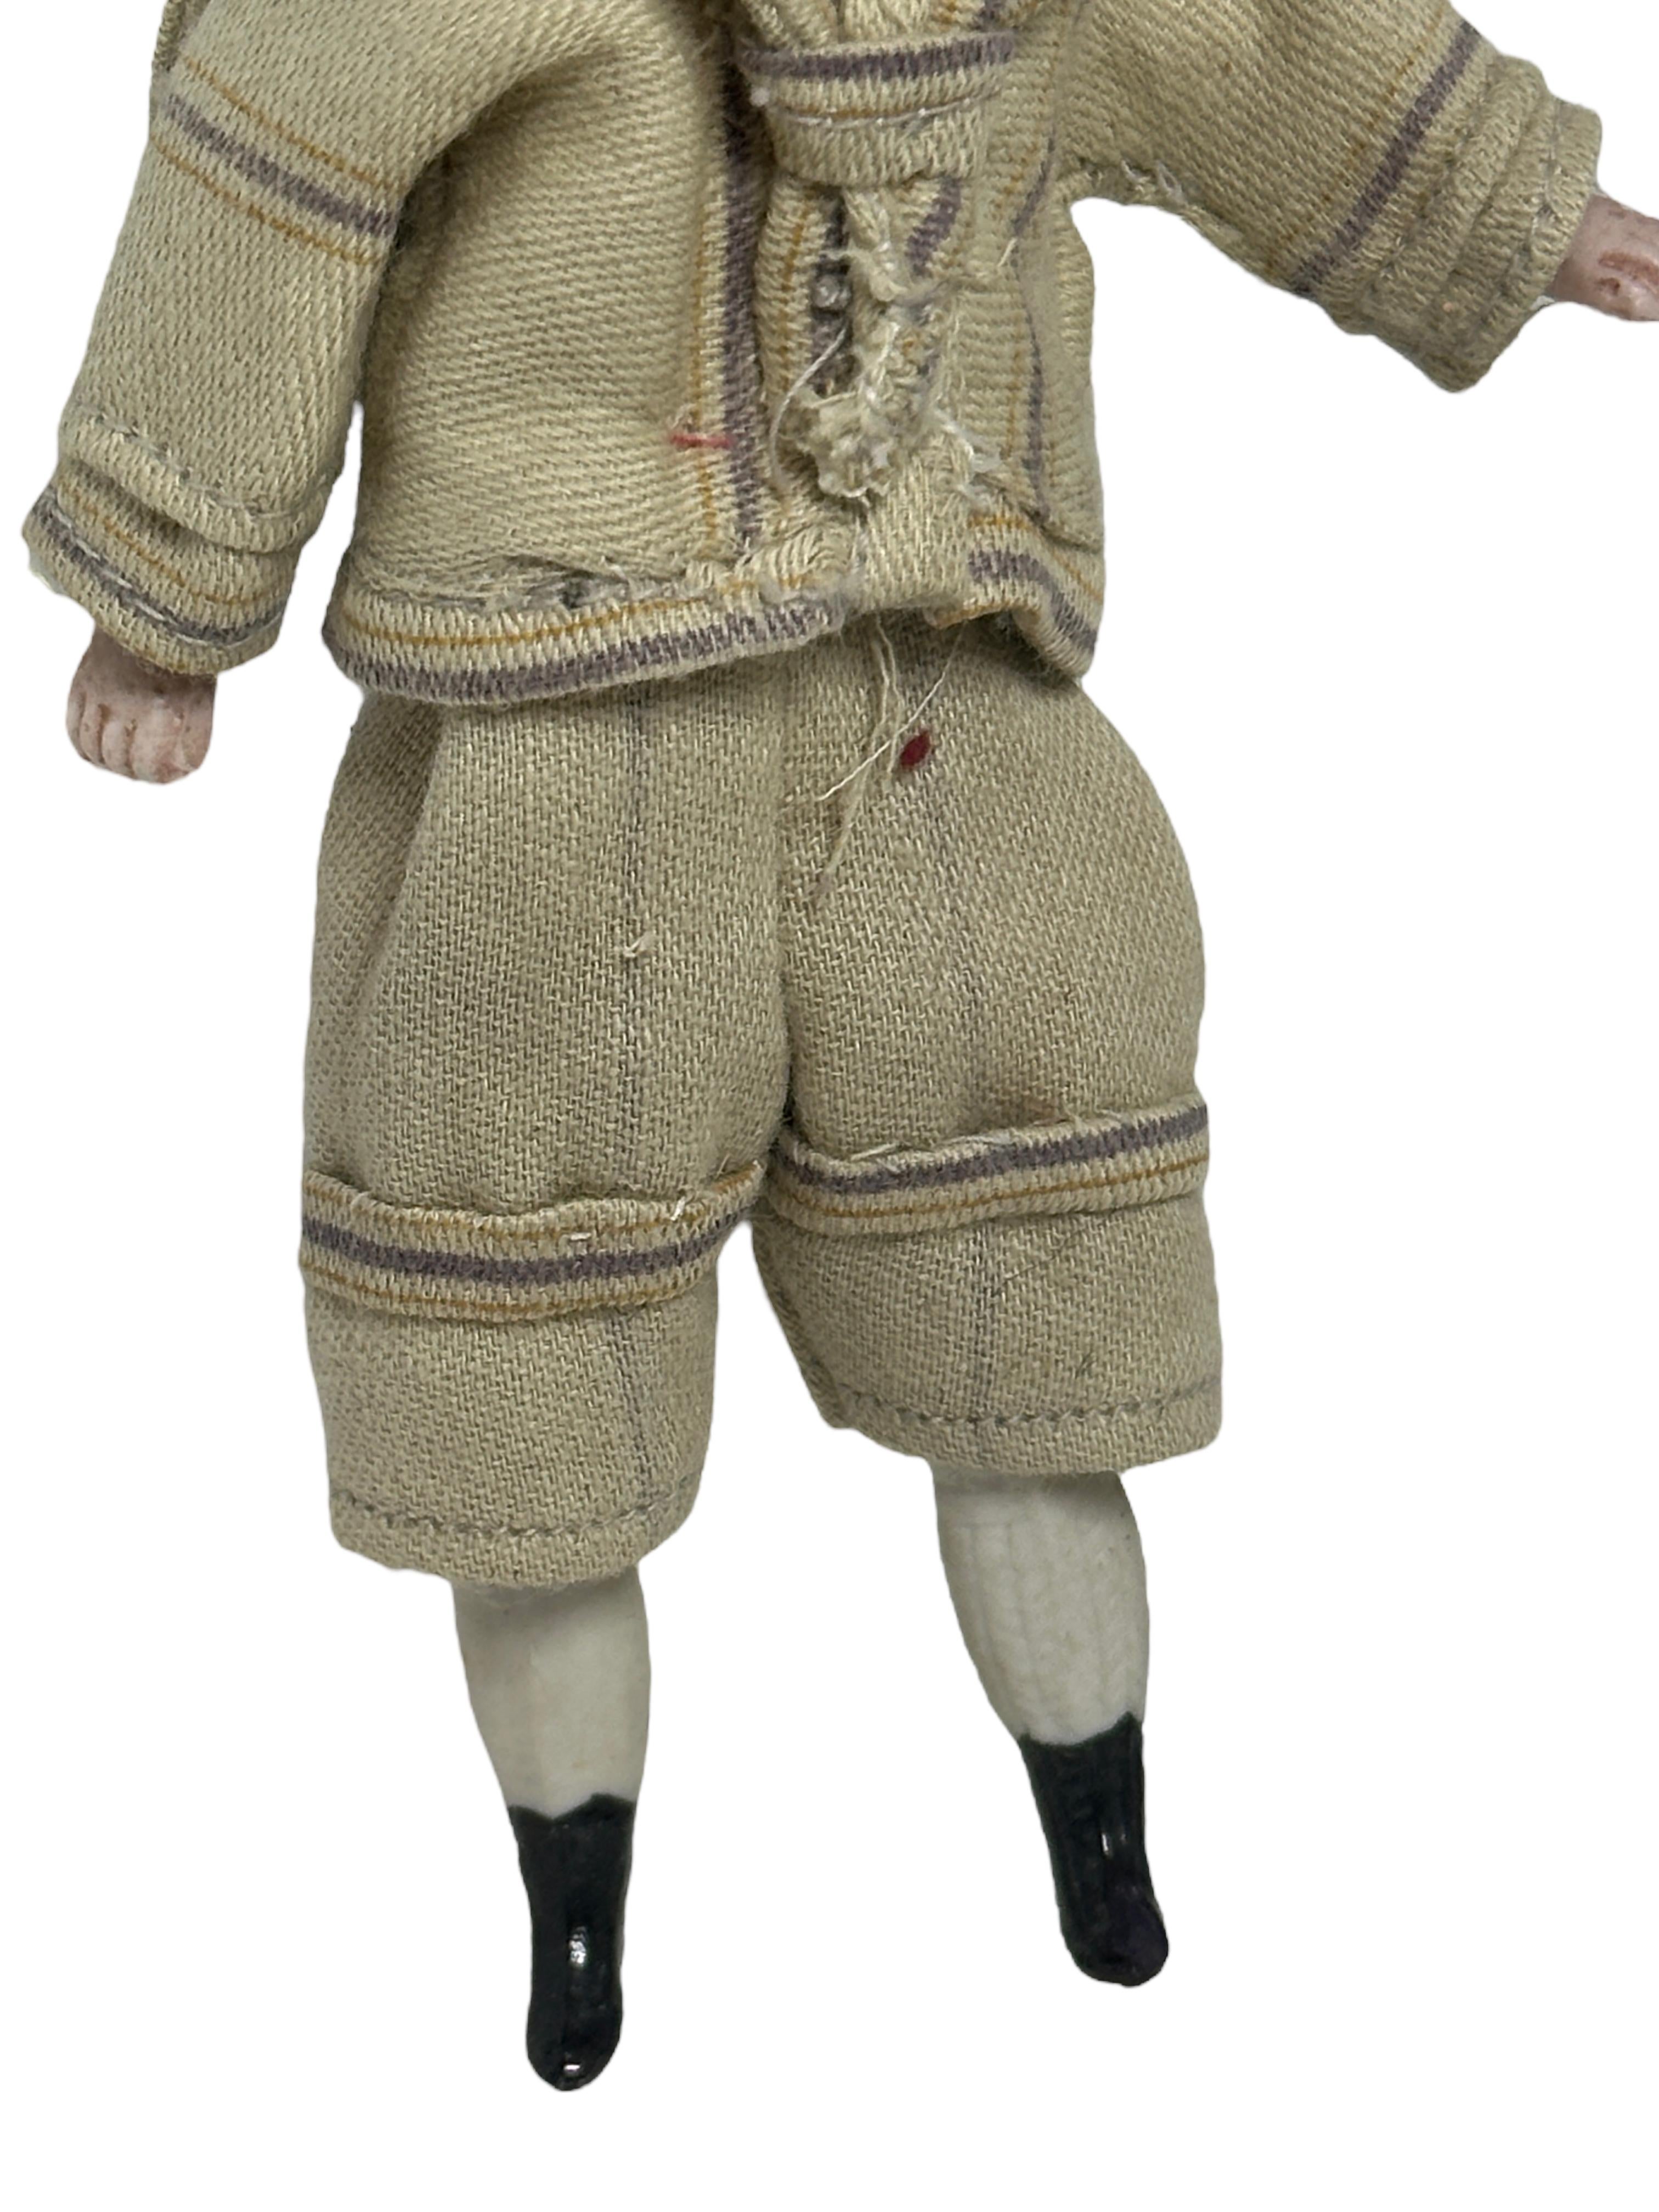 Folk Art Boy dressed in Sailor Outfit Antique German Dollhouse Doll Toy 1900s For Sale